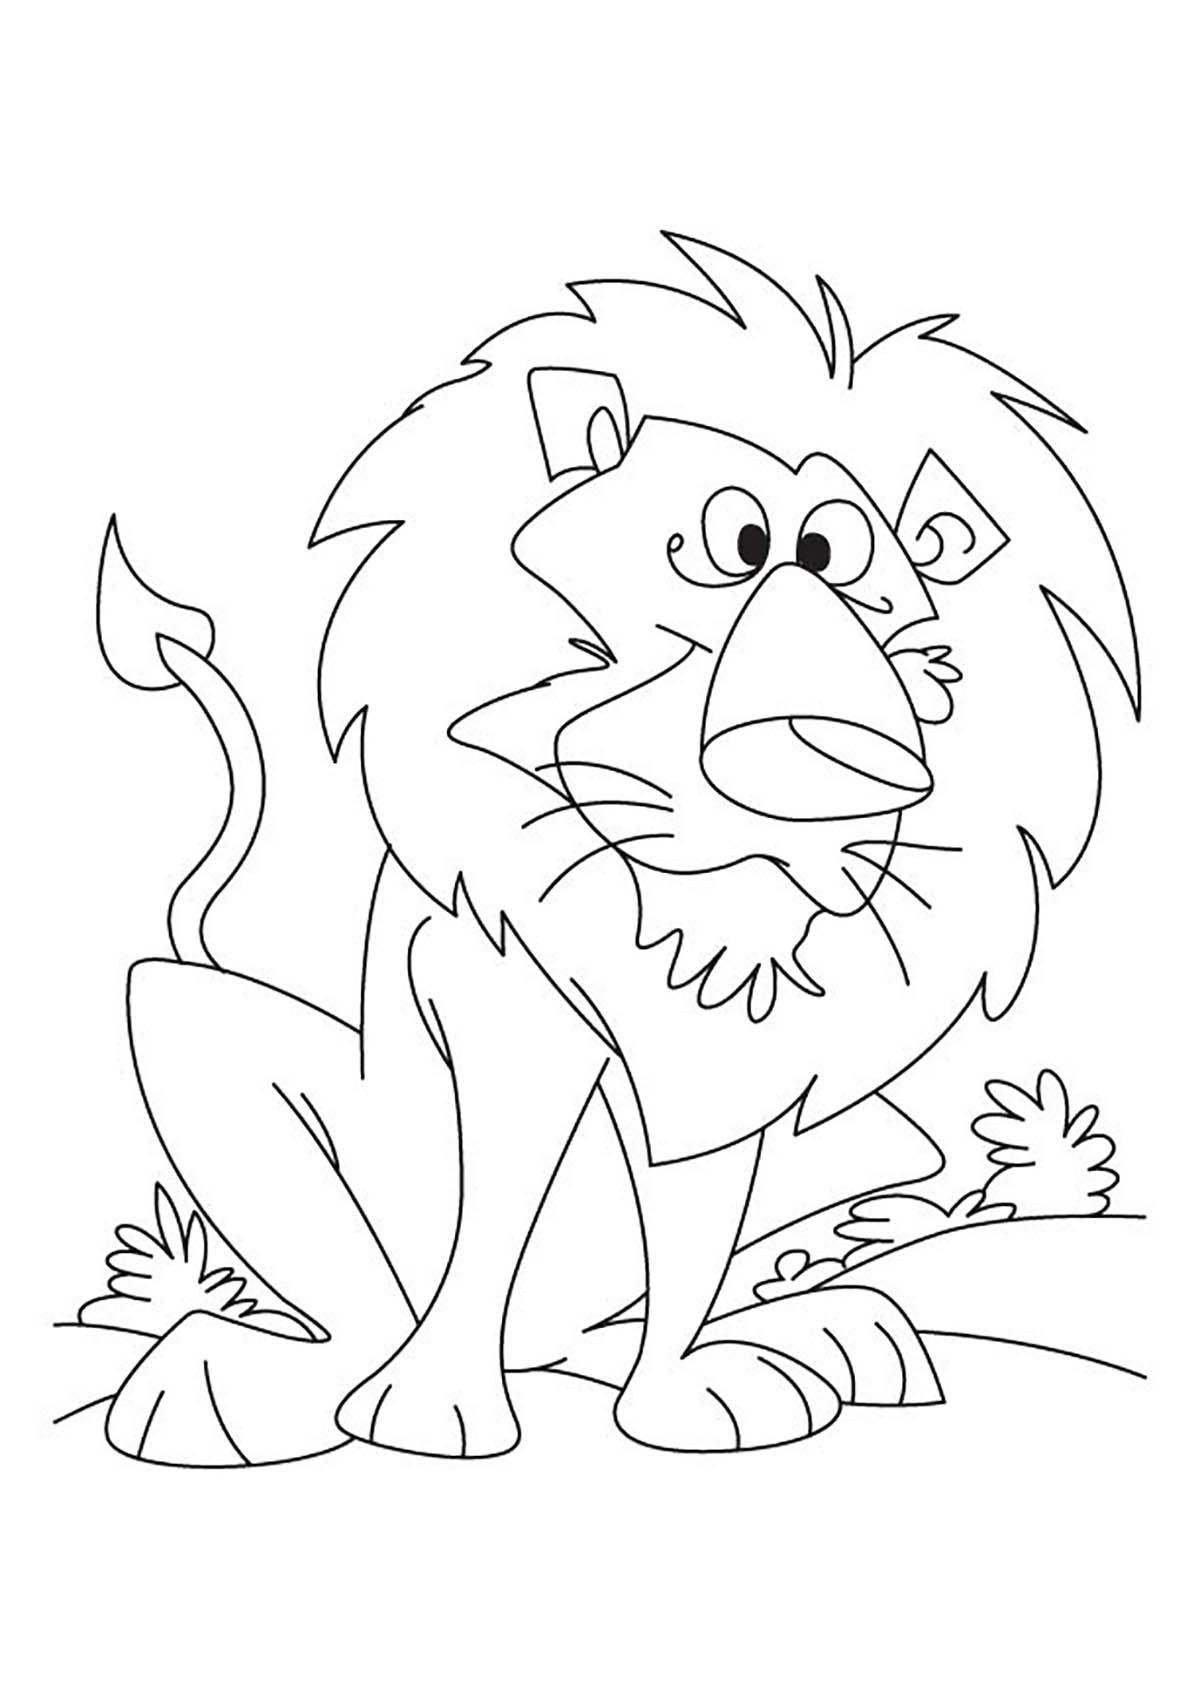 Lion to download - Lion Kids Coloring Pages